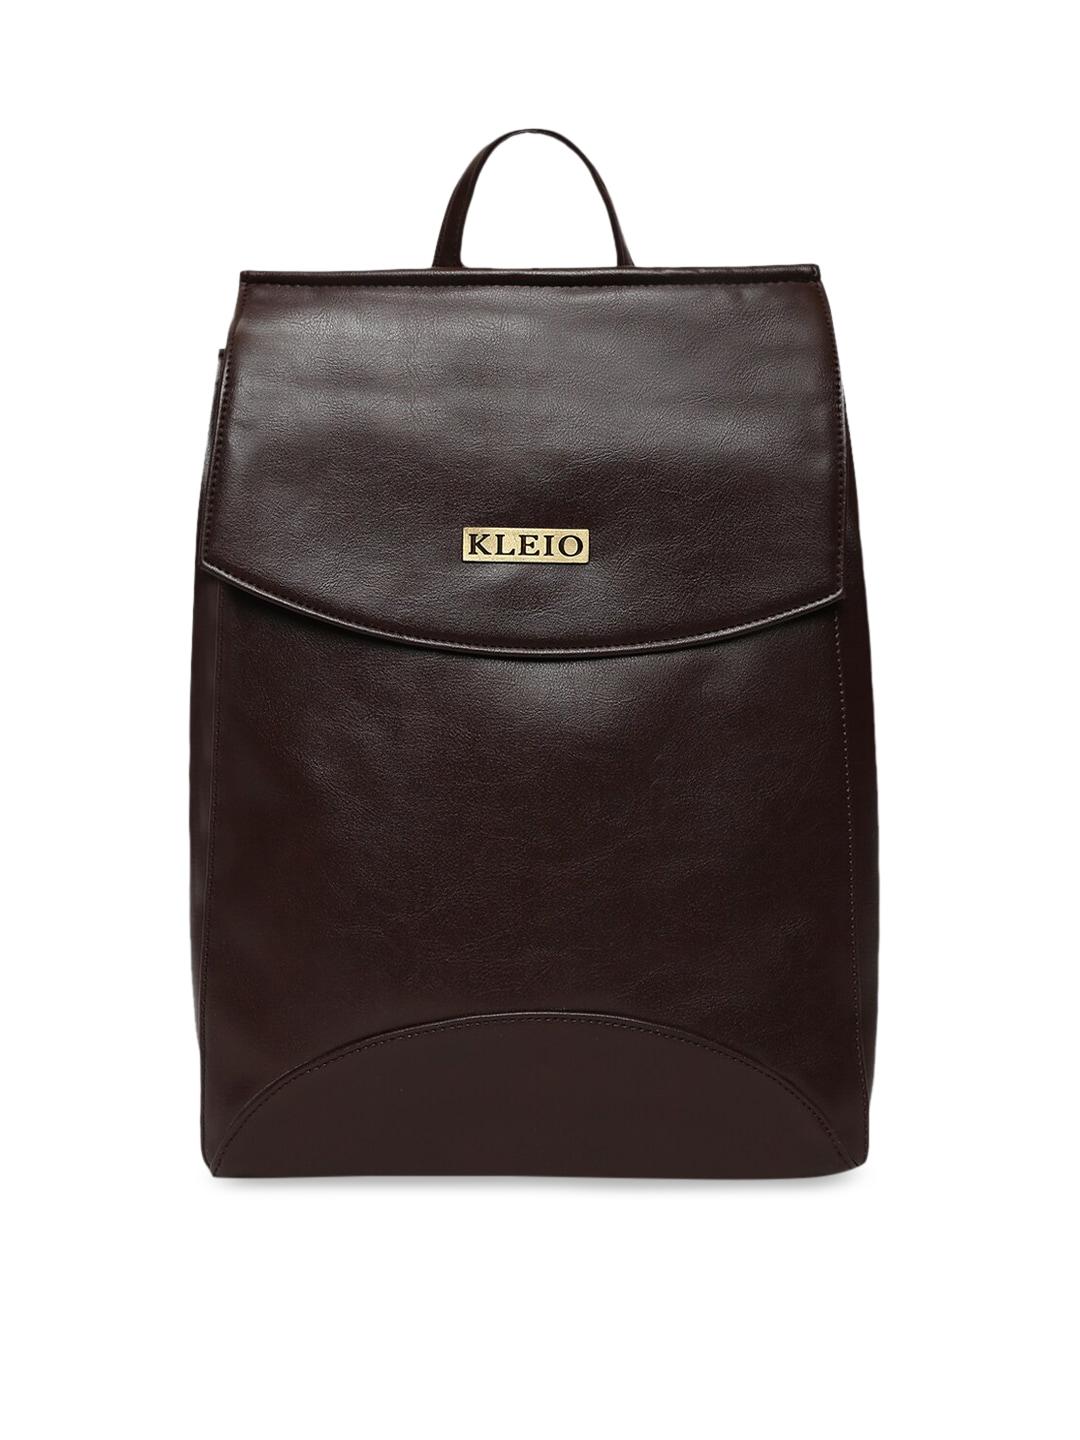 kleio-solid-structured-backpack